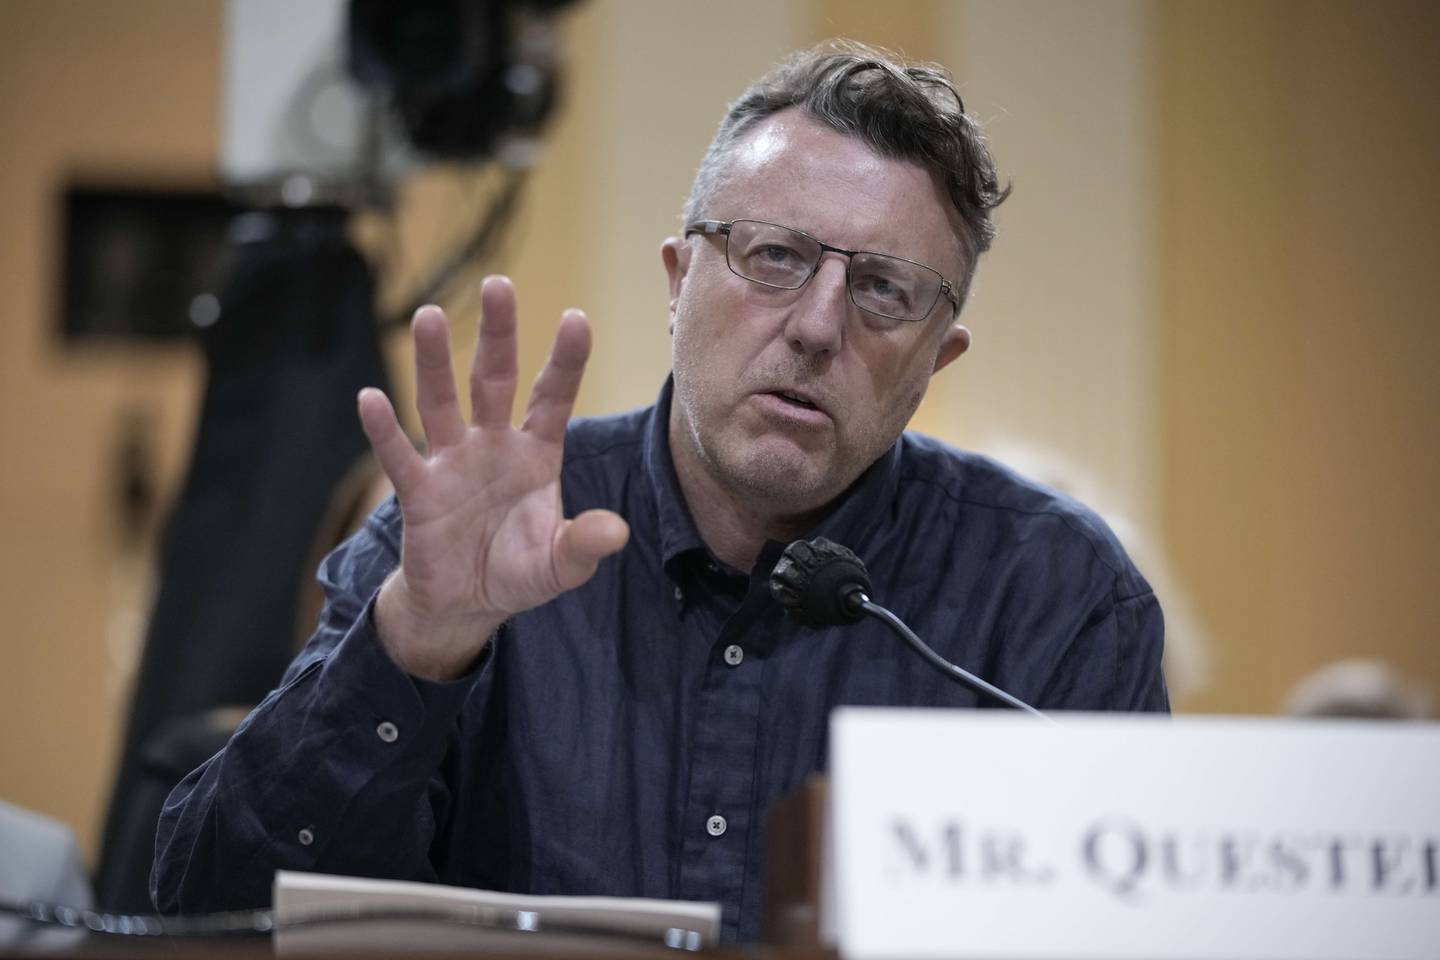 Nick Quested, a documentary filmmaker who was embedded with the Proud Boys, a far-right militia group, testifies during a hearing by the Select Committee to Investigate the January 6th Attack on the U. S.  Capitol in Washington, DC. AFP